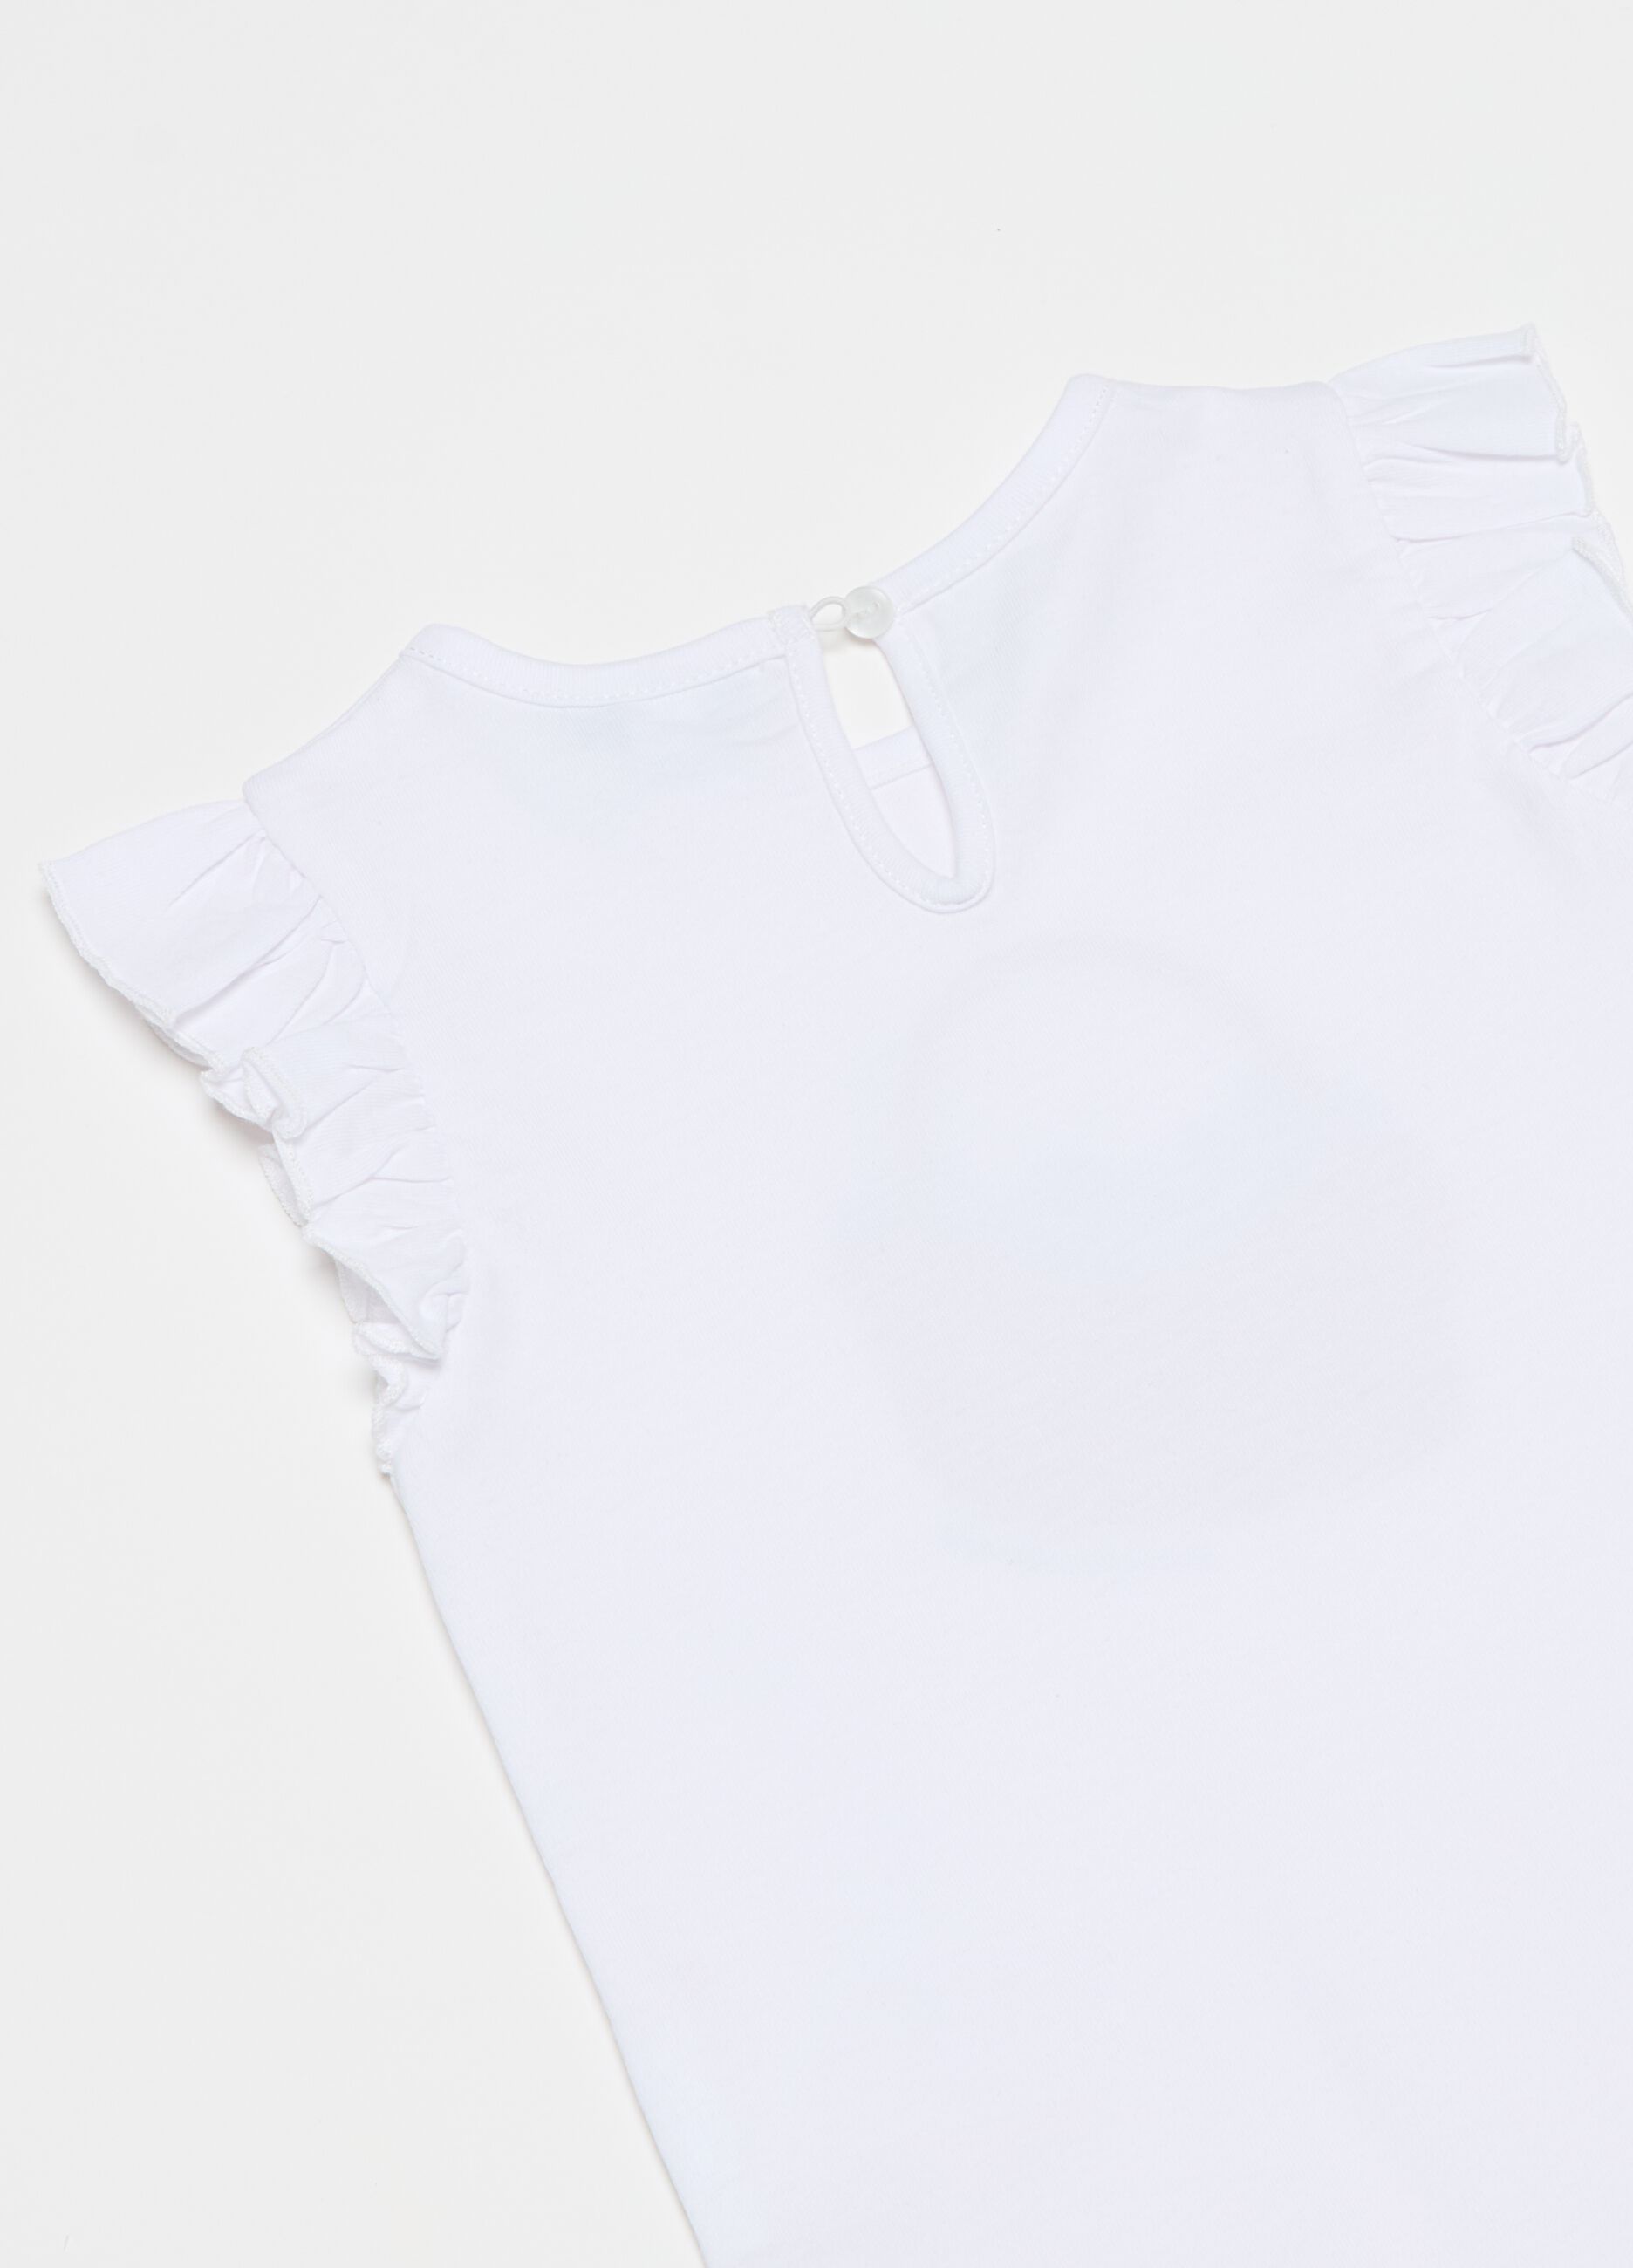 Cotton T-shirt with print and frills